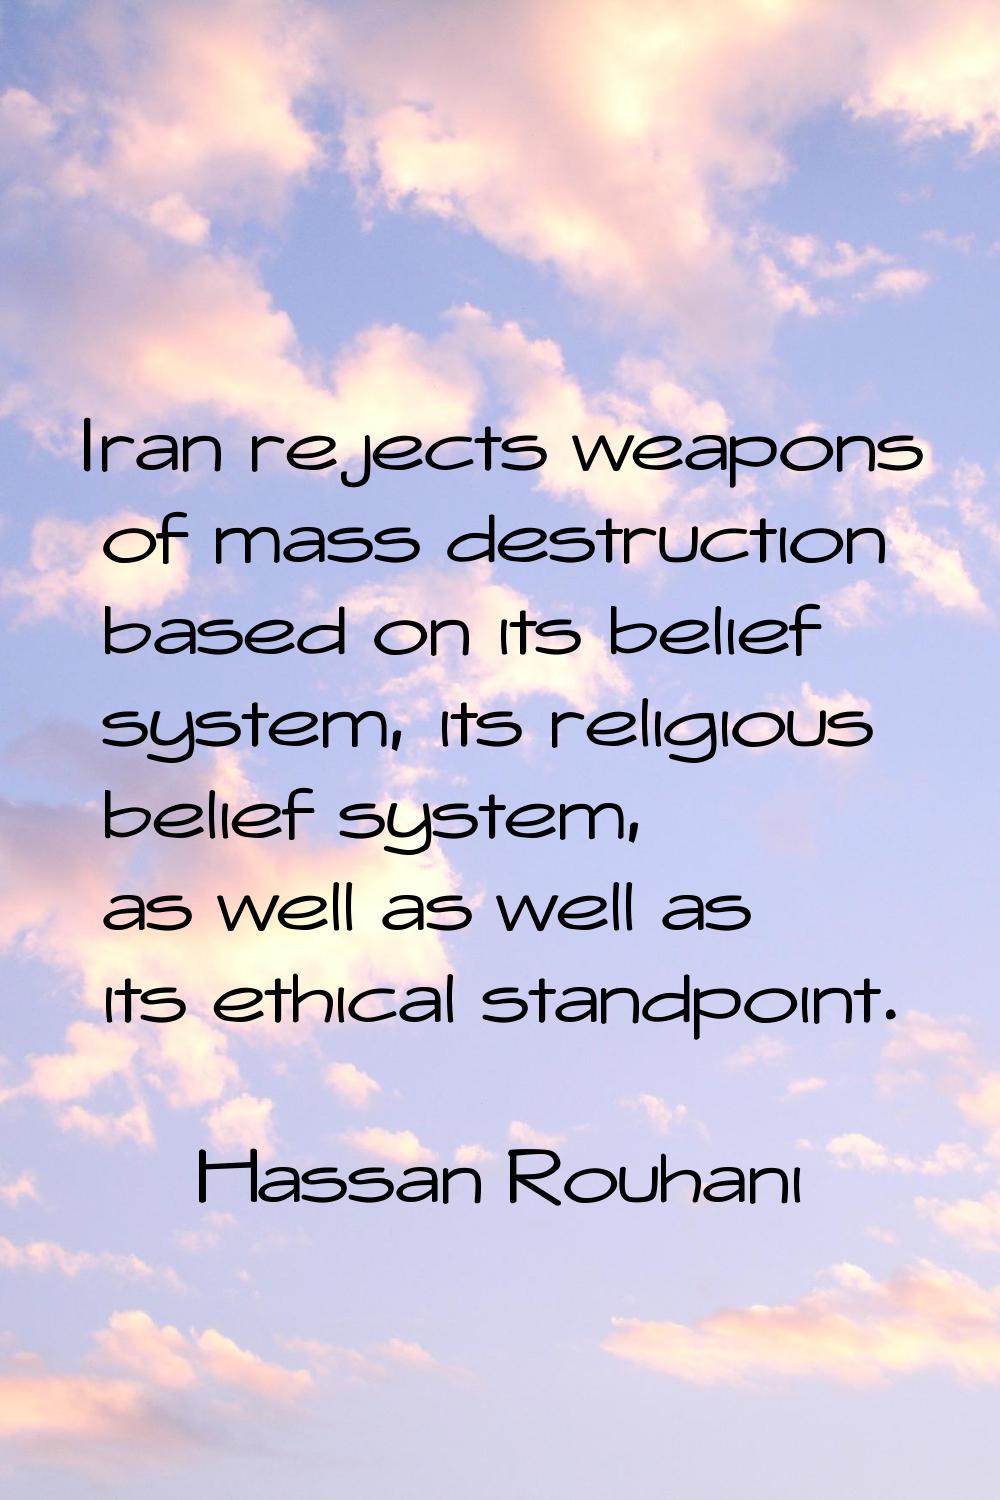 Iran rejects weapons of mass destruction based on its belief system, its religious belief system, a